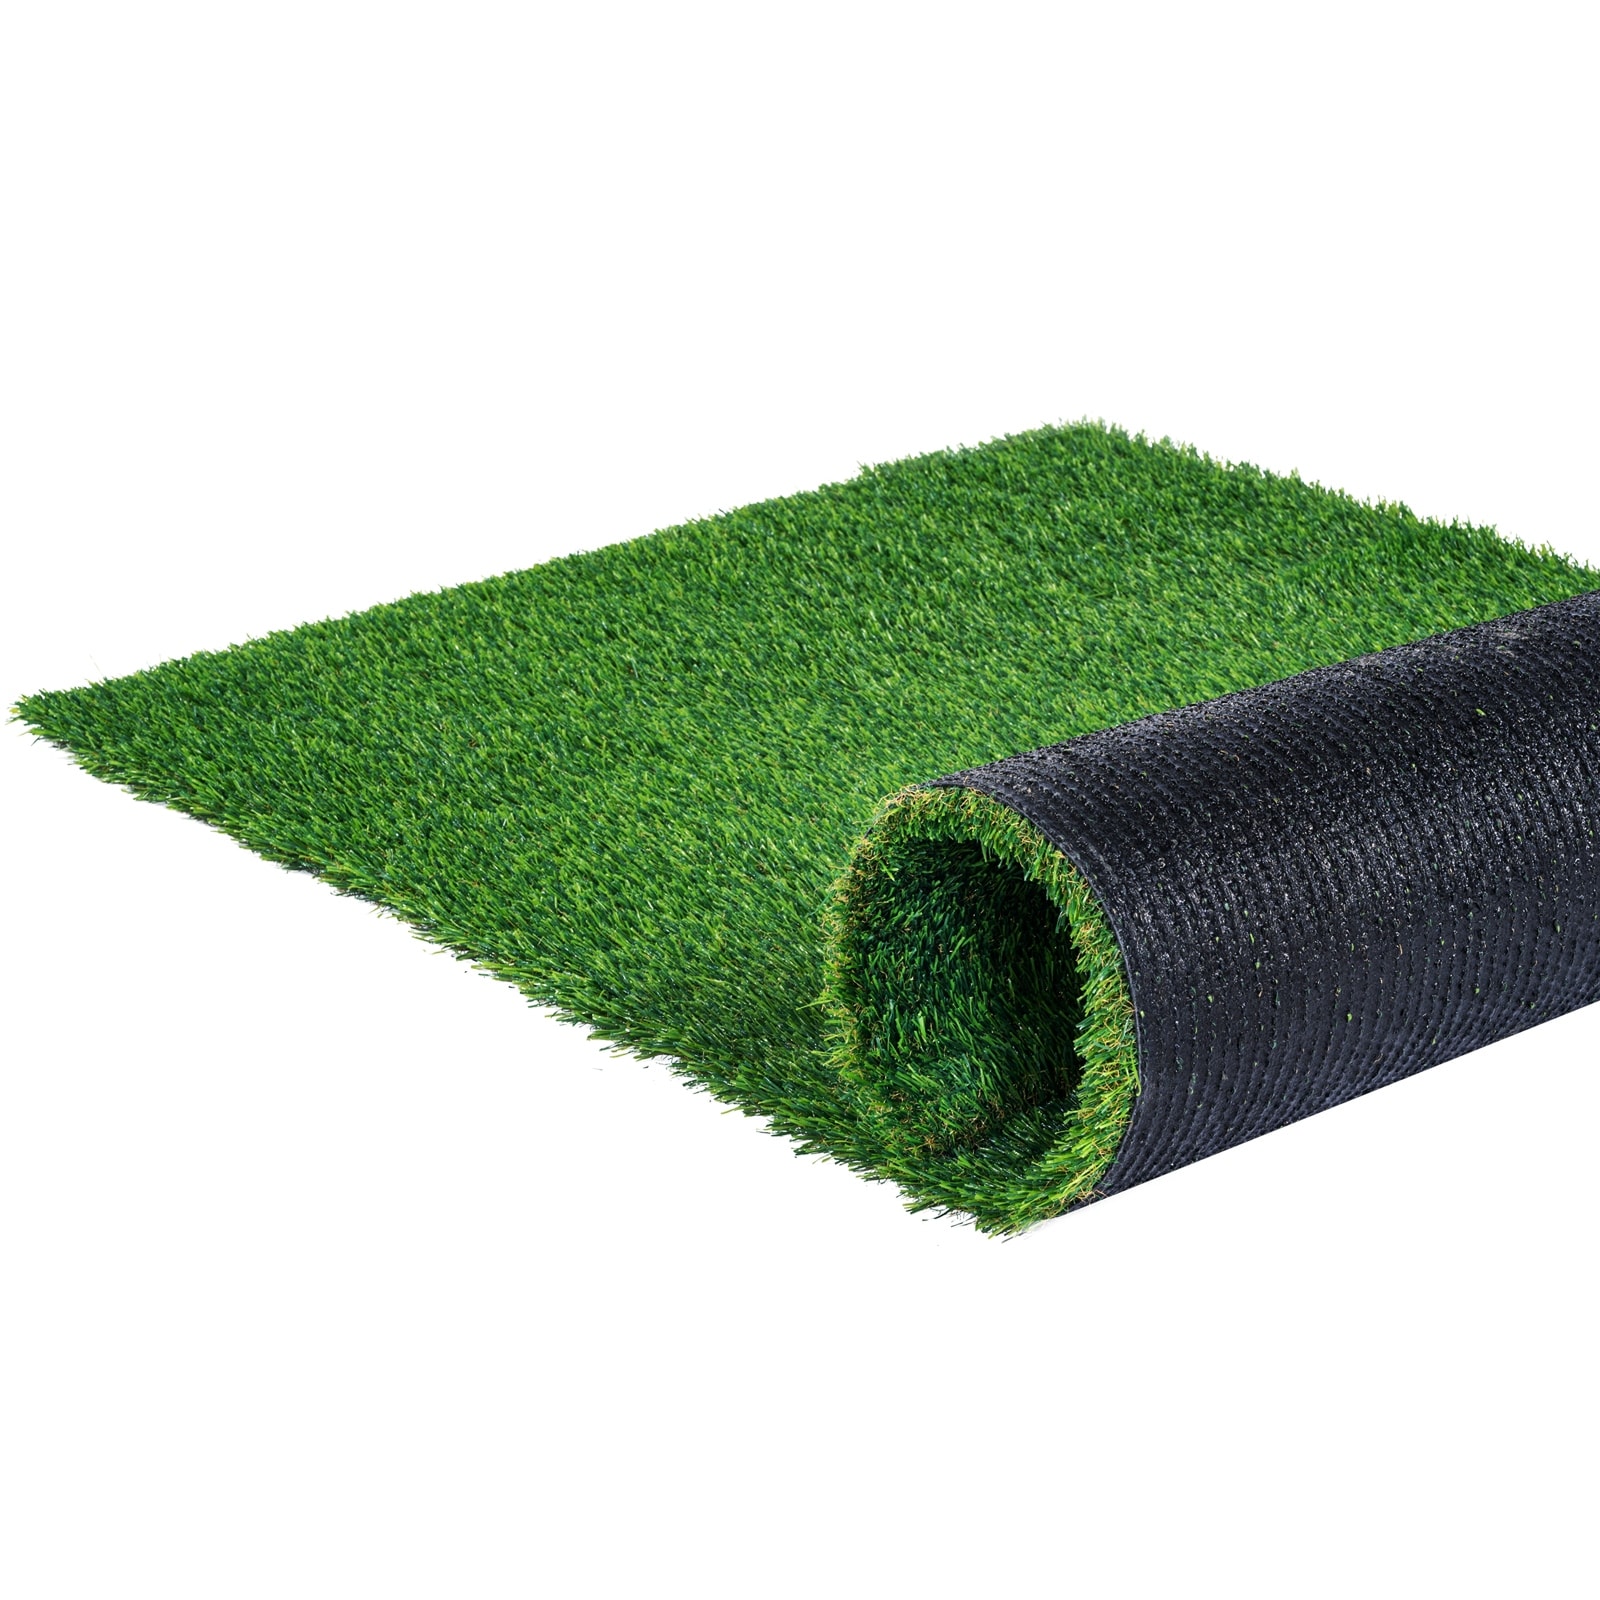 https://ak1.ostkcdn.com/images/products/is/images/direct/2a8ce46716b2504ca070730a1dc1d3bb4d275023/VEVOR-Artifical-Grass%2CEasy-to-Clean-with-Drainage-Holes%2C-Perfect-For-Multi-Purpose-Home-Indoor-Entryway-Scraper-Dog-Mats.jpg